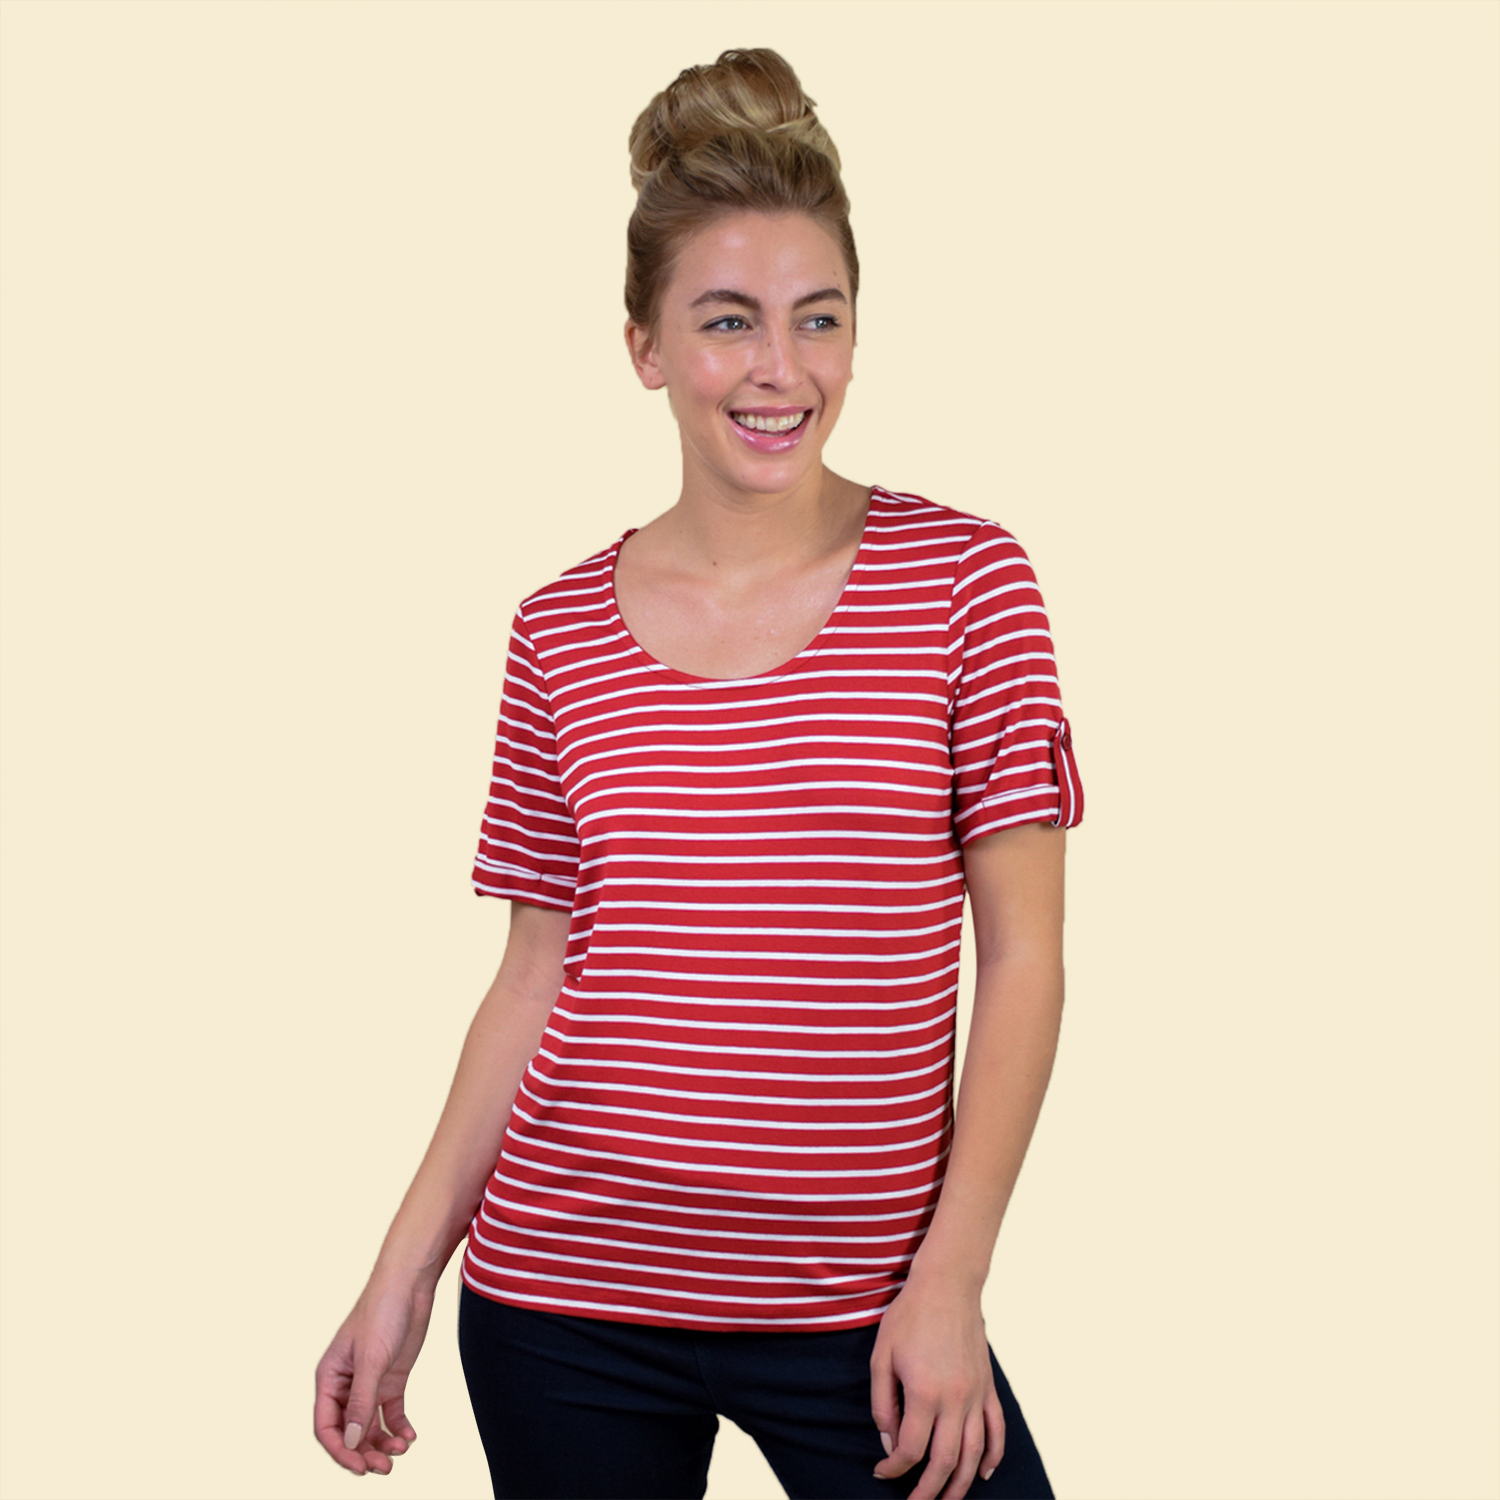 VISCOSE Stripe Jersey Scoop Neck Tee; Stripped style never goes out of fashion; Perfect choice of casual wear flatteringly styled with a scoop neckline; Expertly fashioned in 200gsm viscose,